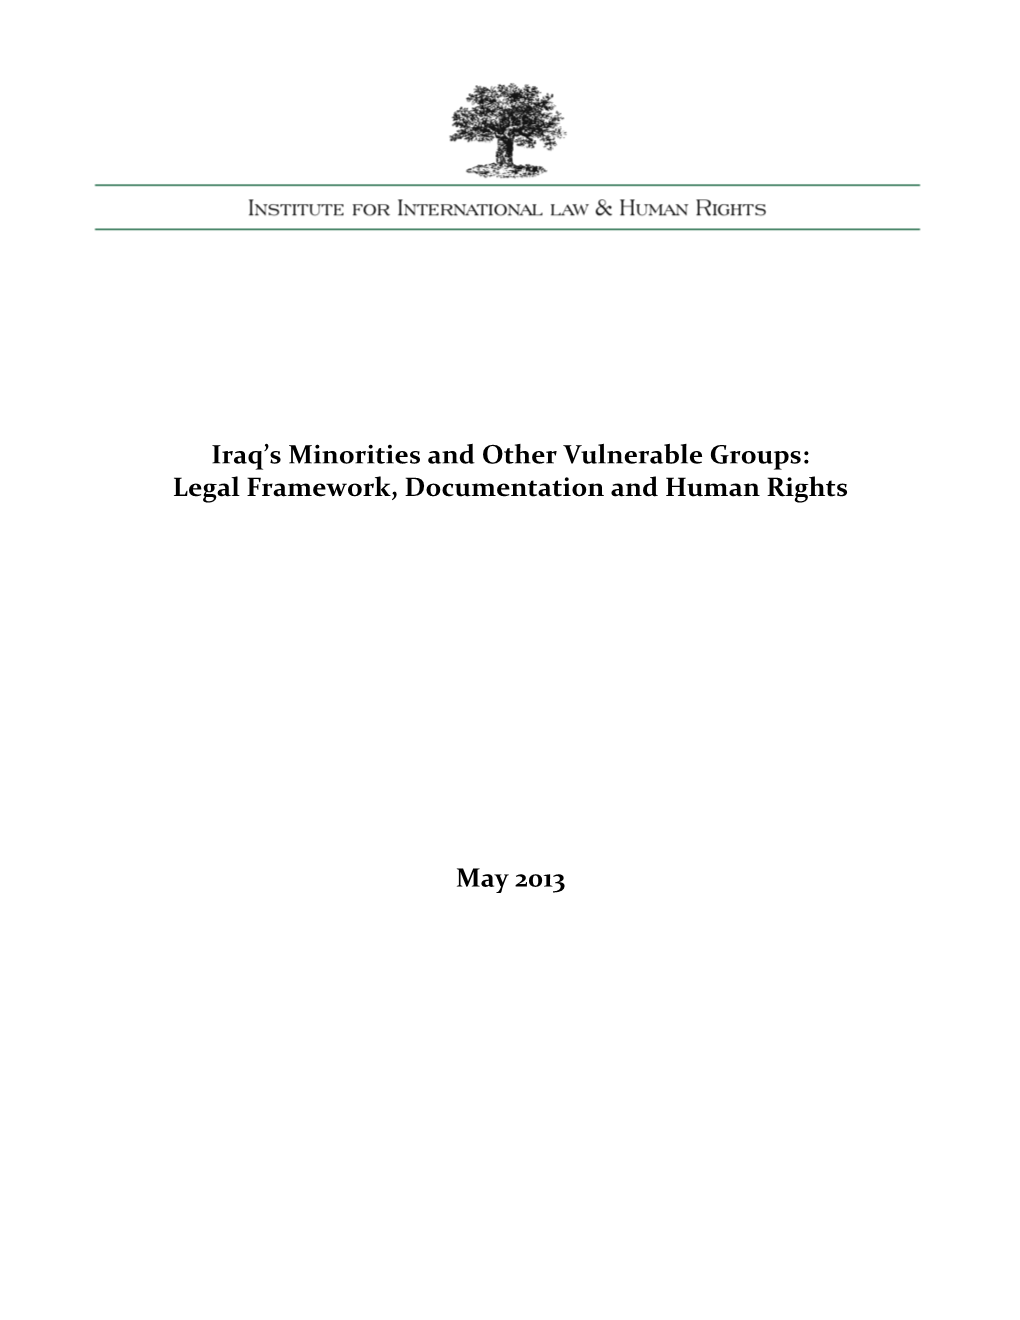 Iraq's Minorities and Other Vulnerable Groups: Legal Framework, Documentation and Human Rights May 2013